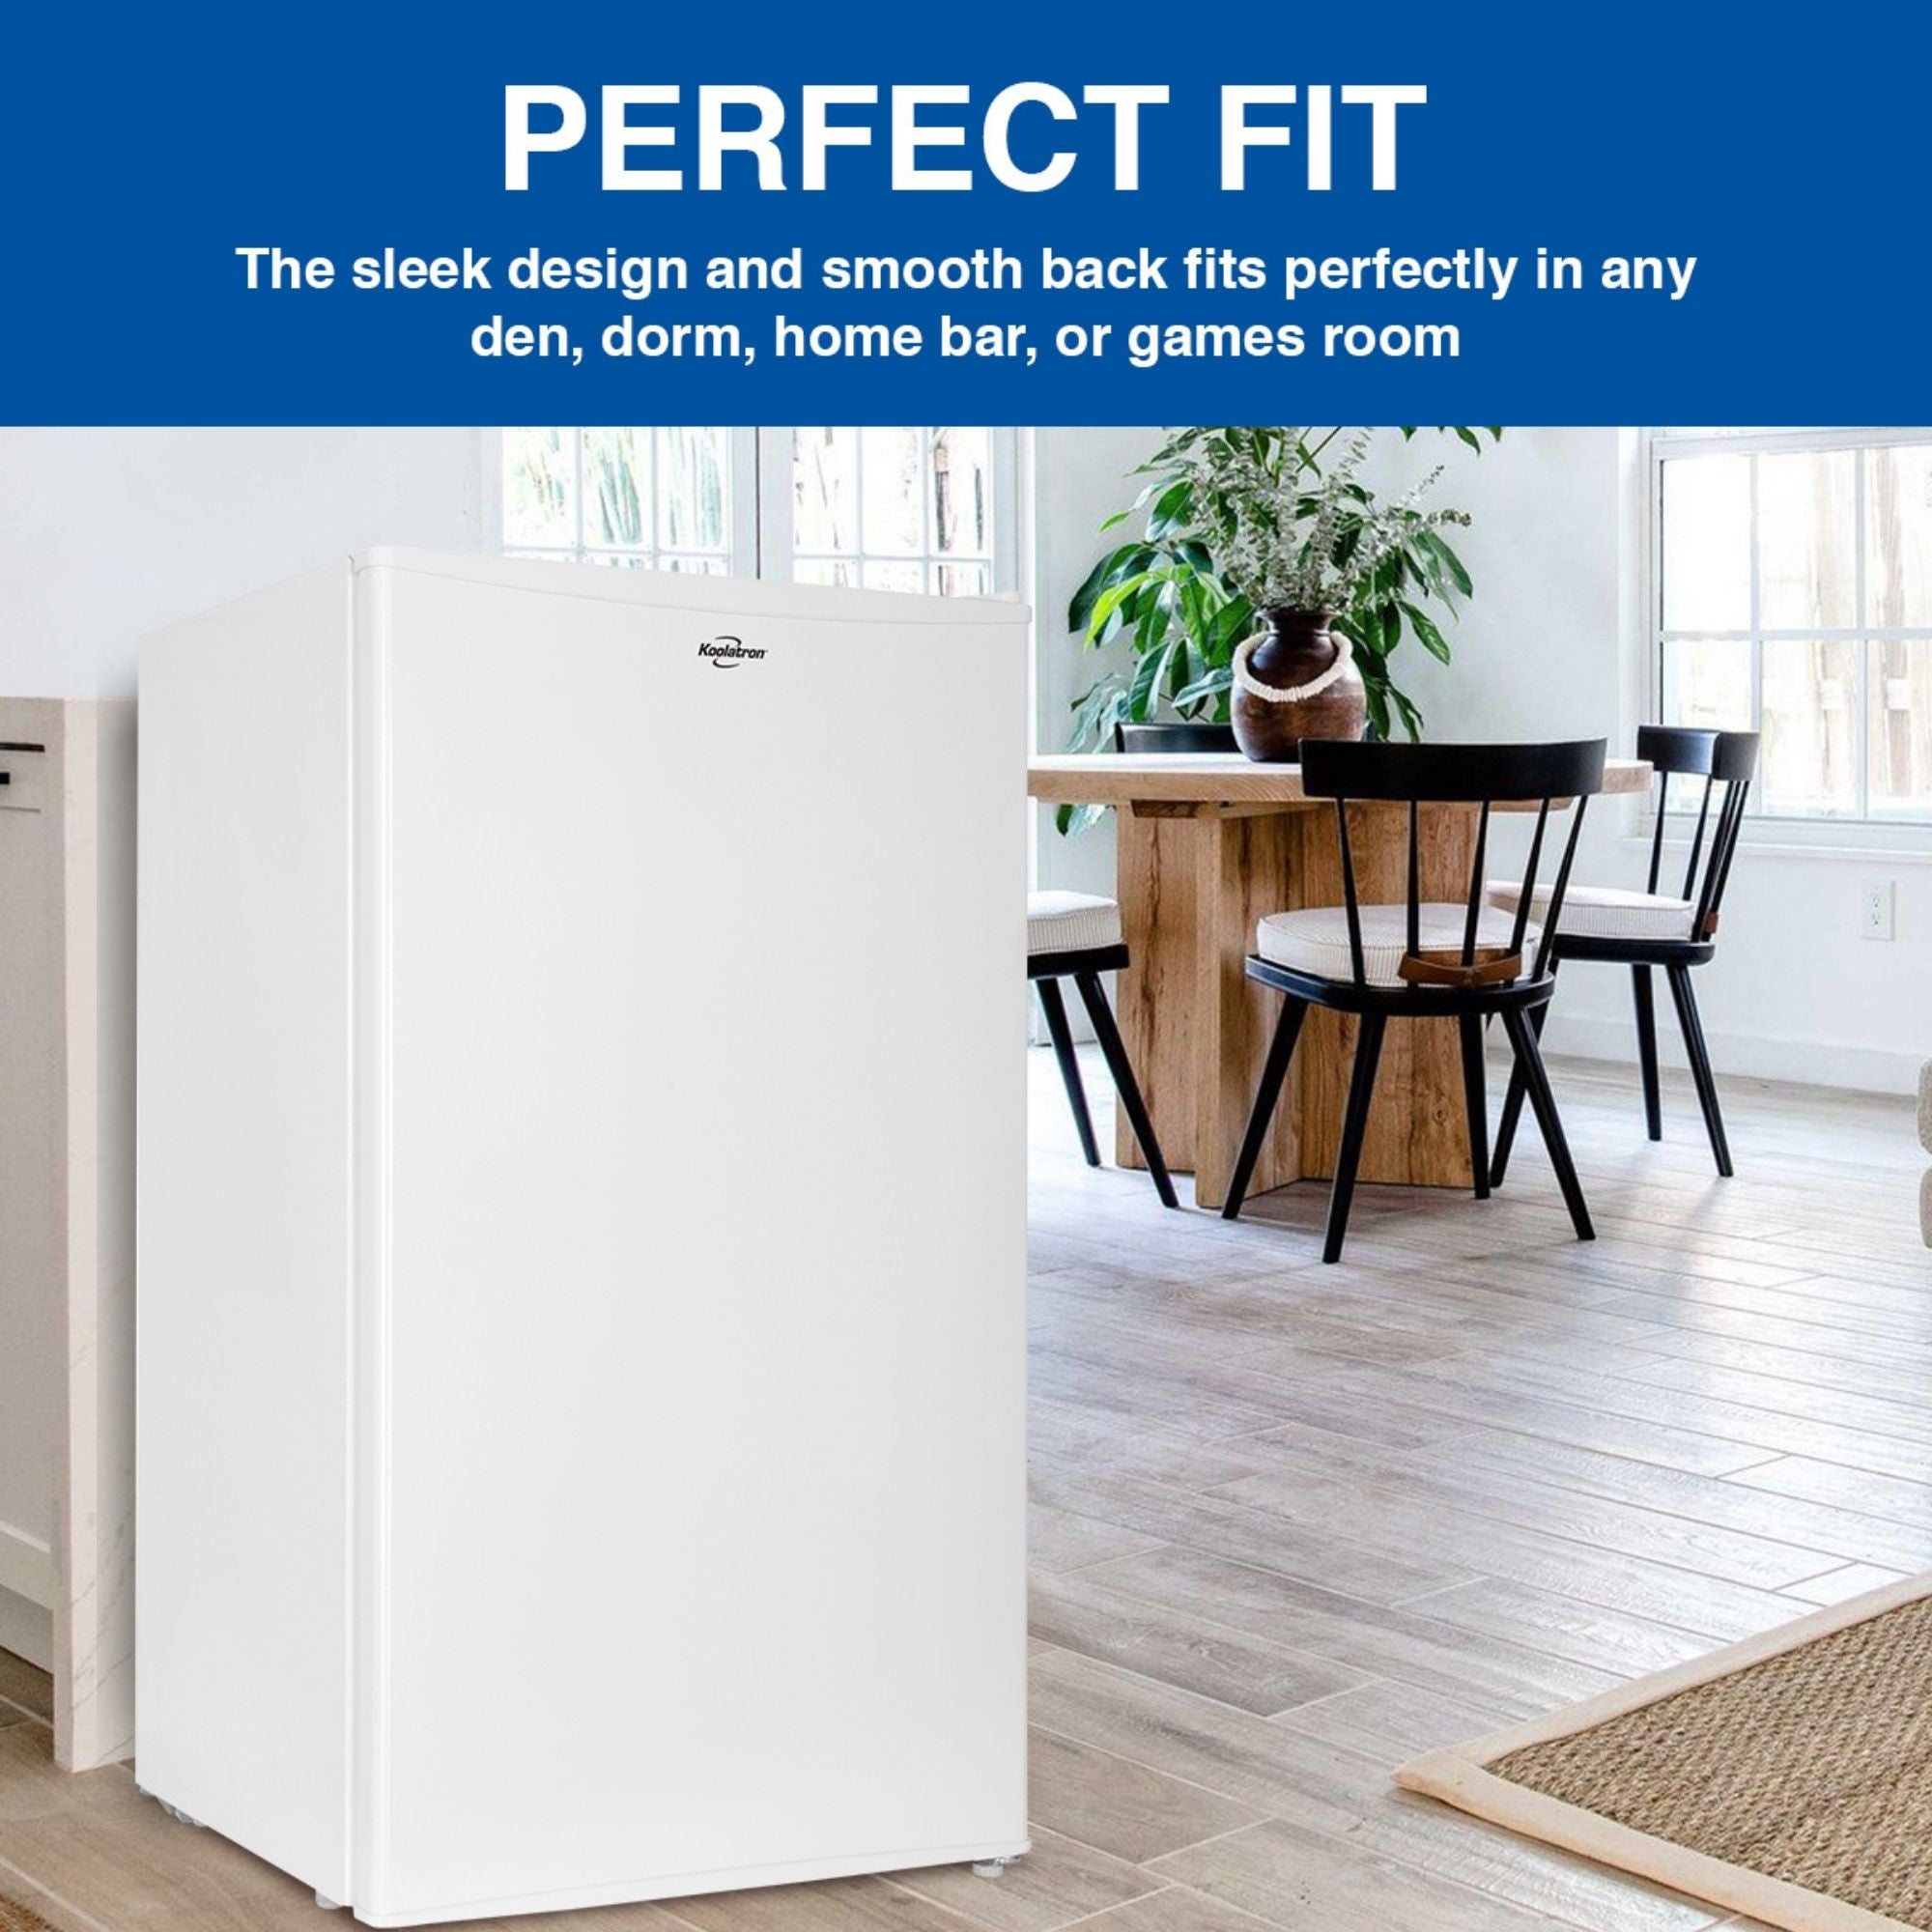 Lifestyle image of white compact fridge with freezer on a light-colored plank floor with a wooden table and chairs, two large windows, and a large potted plant in the background. Text above reads, "Perfect fit: The sleek design and smooth back fits perfectly in any den, dorm, home bar, or games room"